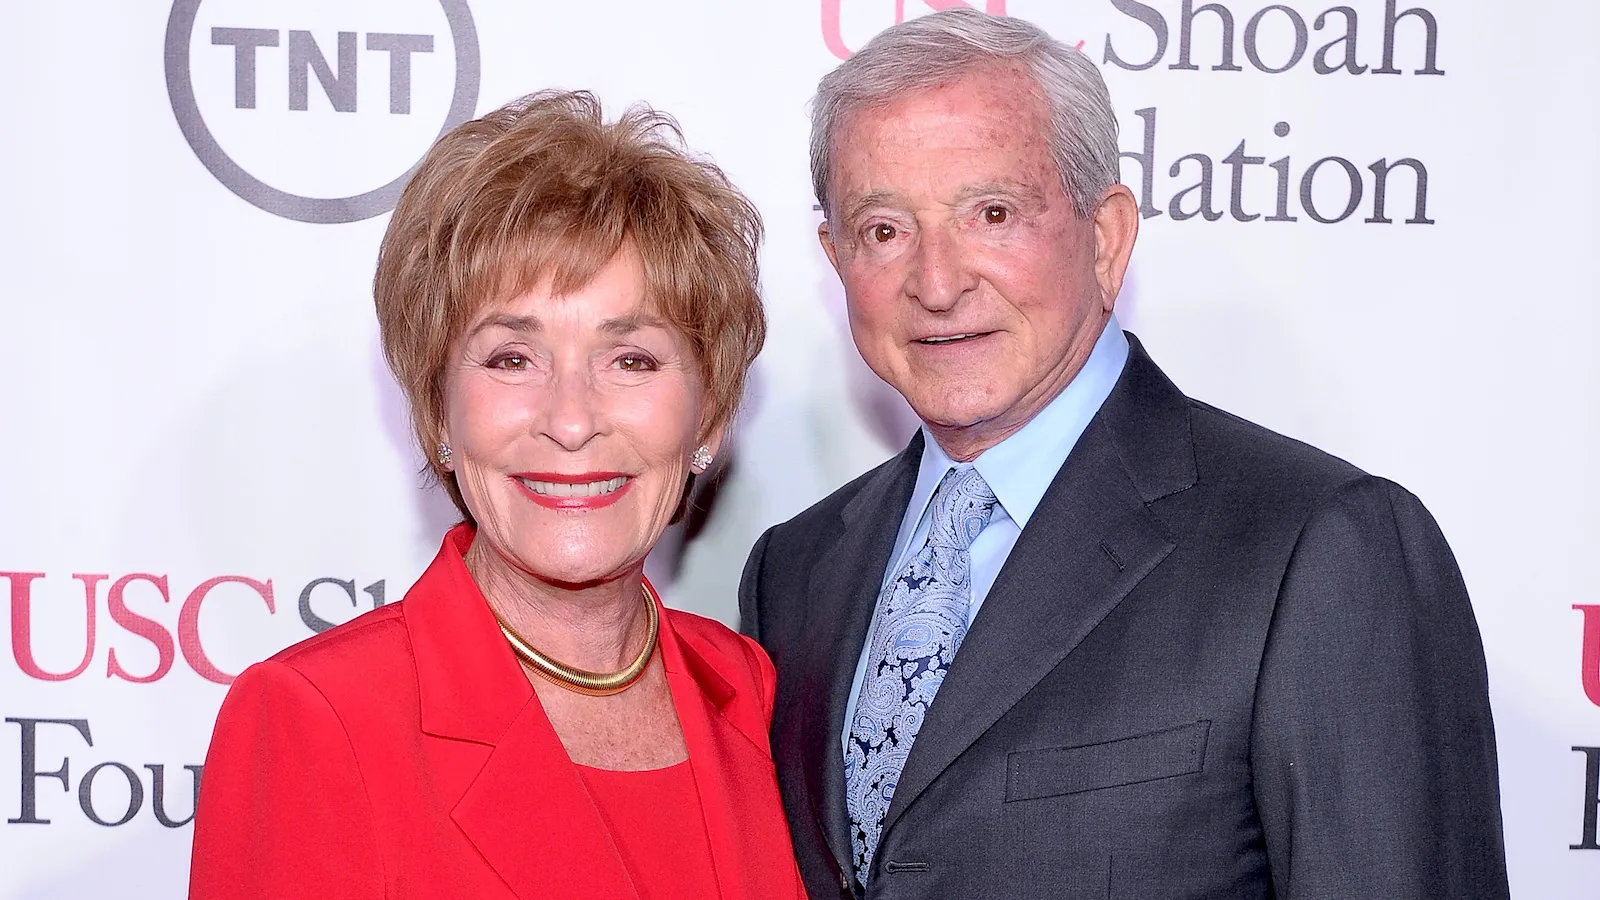 Judge Judy standing beside her husband Jerry Sheindlin on the red carpet